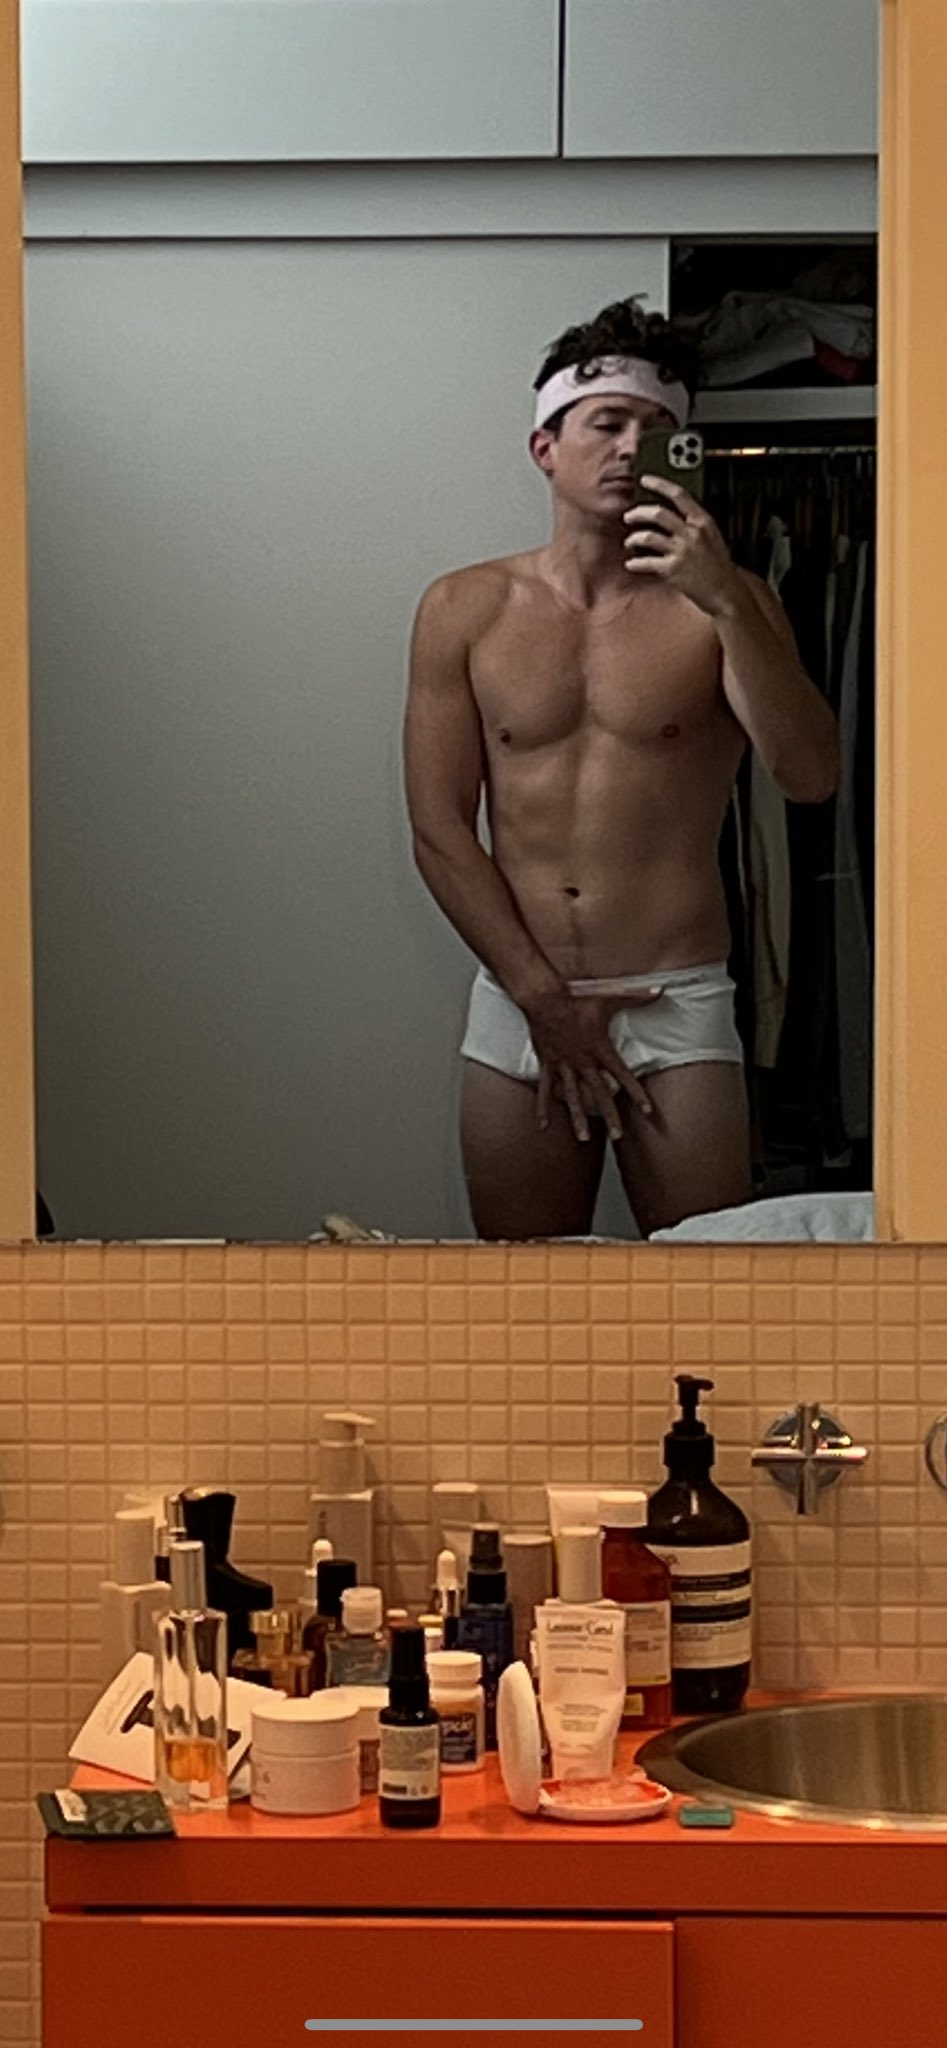 Charlie Put shared this picture with a hand over his bulge on Twitter in 2022